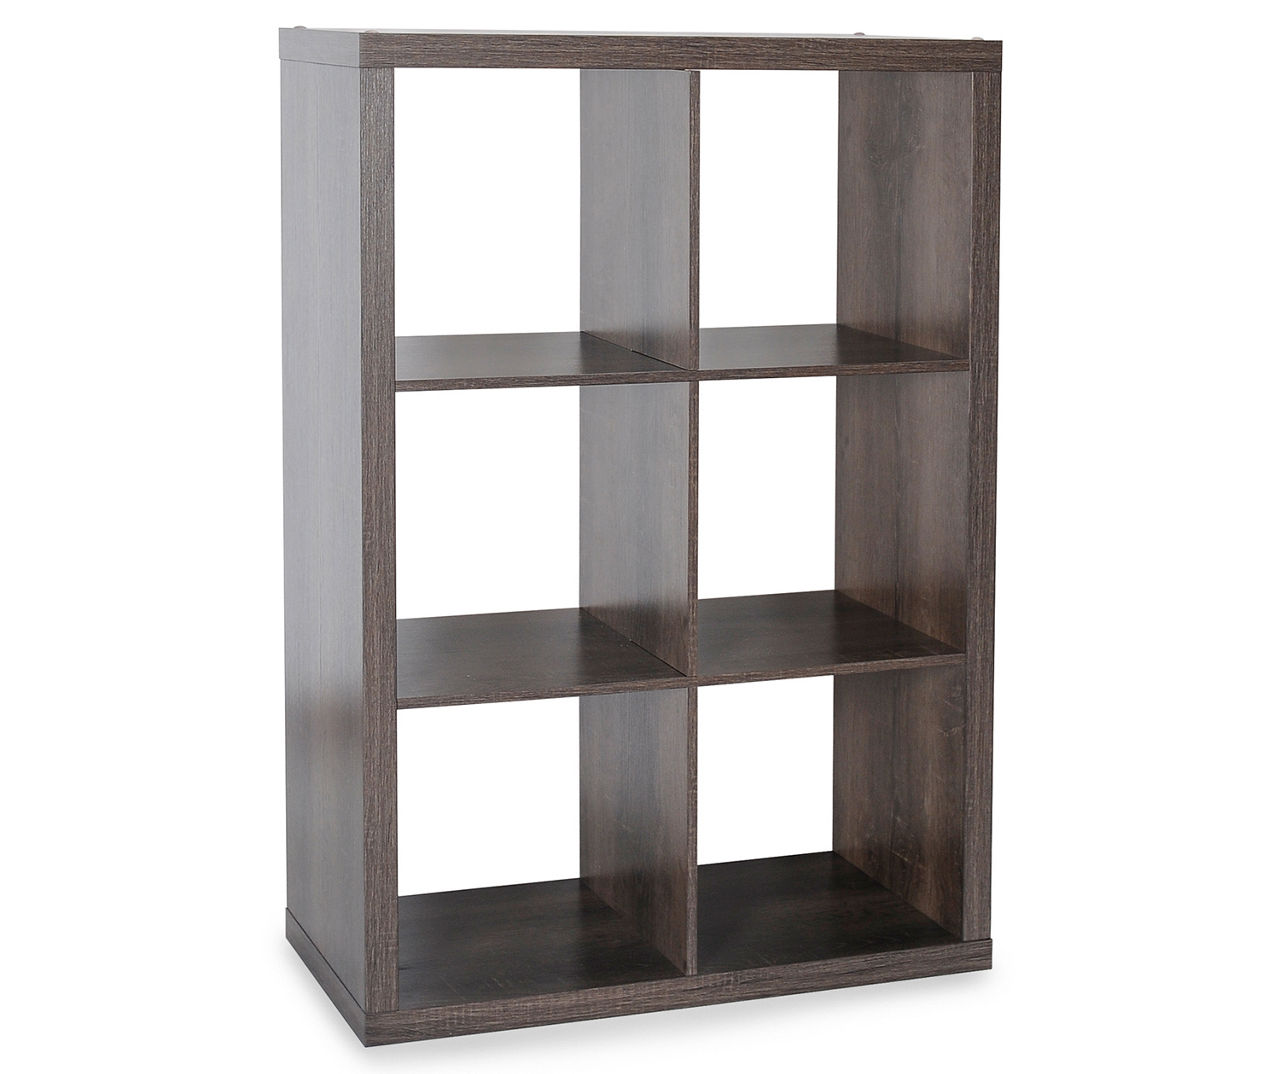 STORAGE SOLUTIONS 6 CUBE BROWN